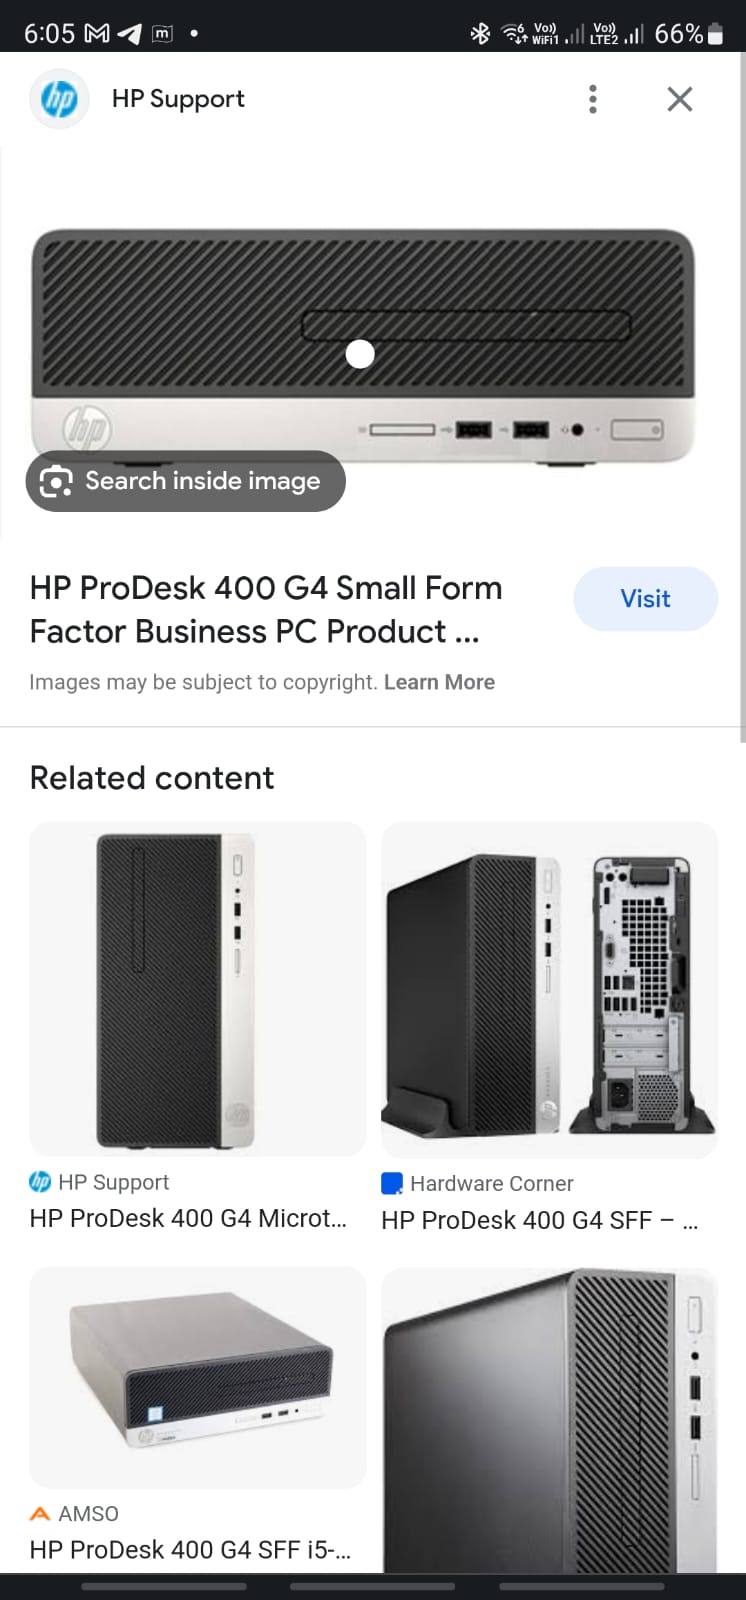 HP Prodesk 400 G4 Small Form Factor PC